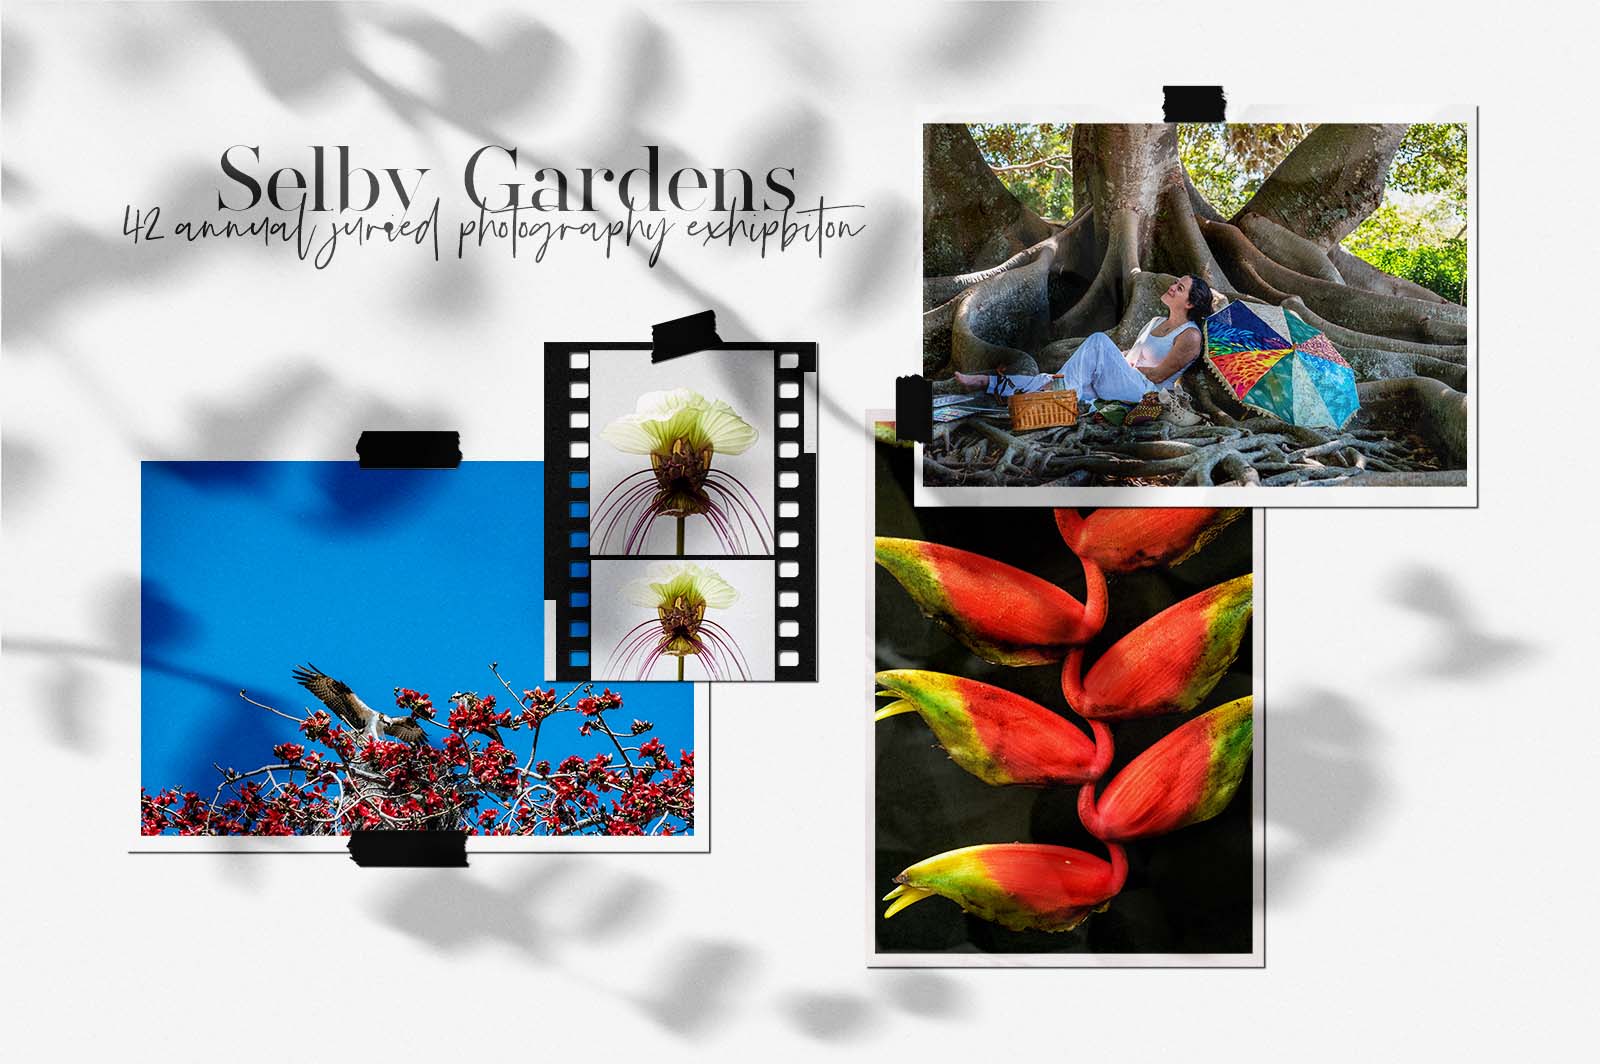 Selby Gardens 42nd Annual Juried Photography Exhibition